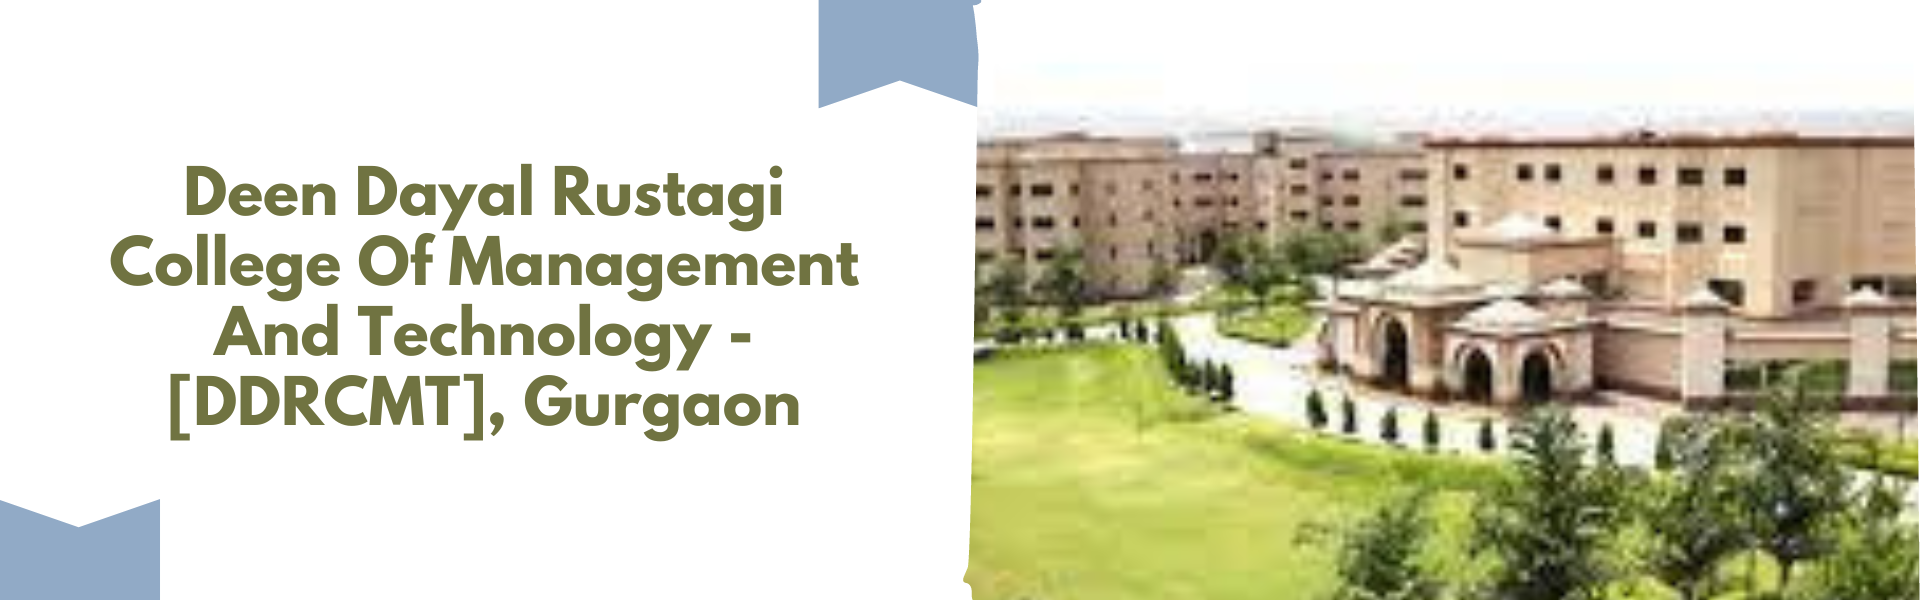 Deen Dayal Rustagi College Of Management And Technology - [DDRCMT], Gurgaon